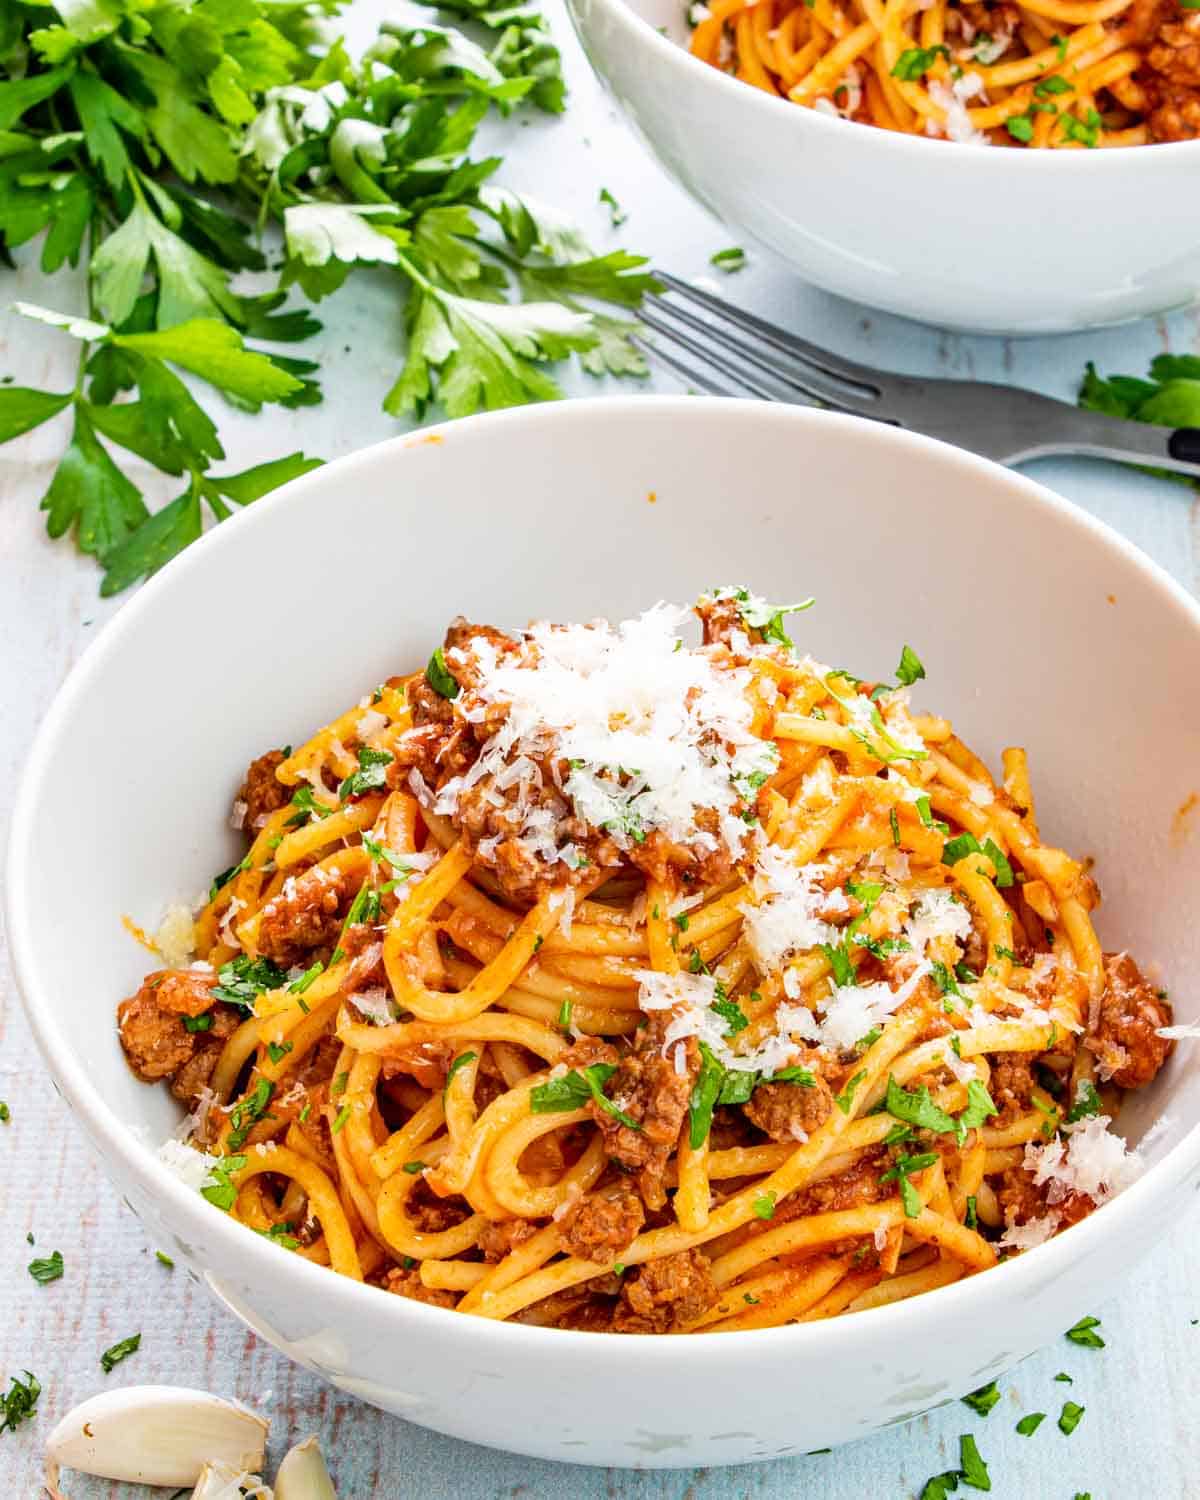 meat spaghetti on a white plate garnished with parsley.